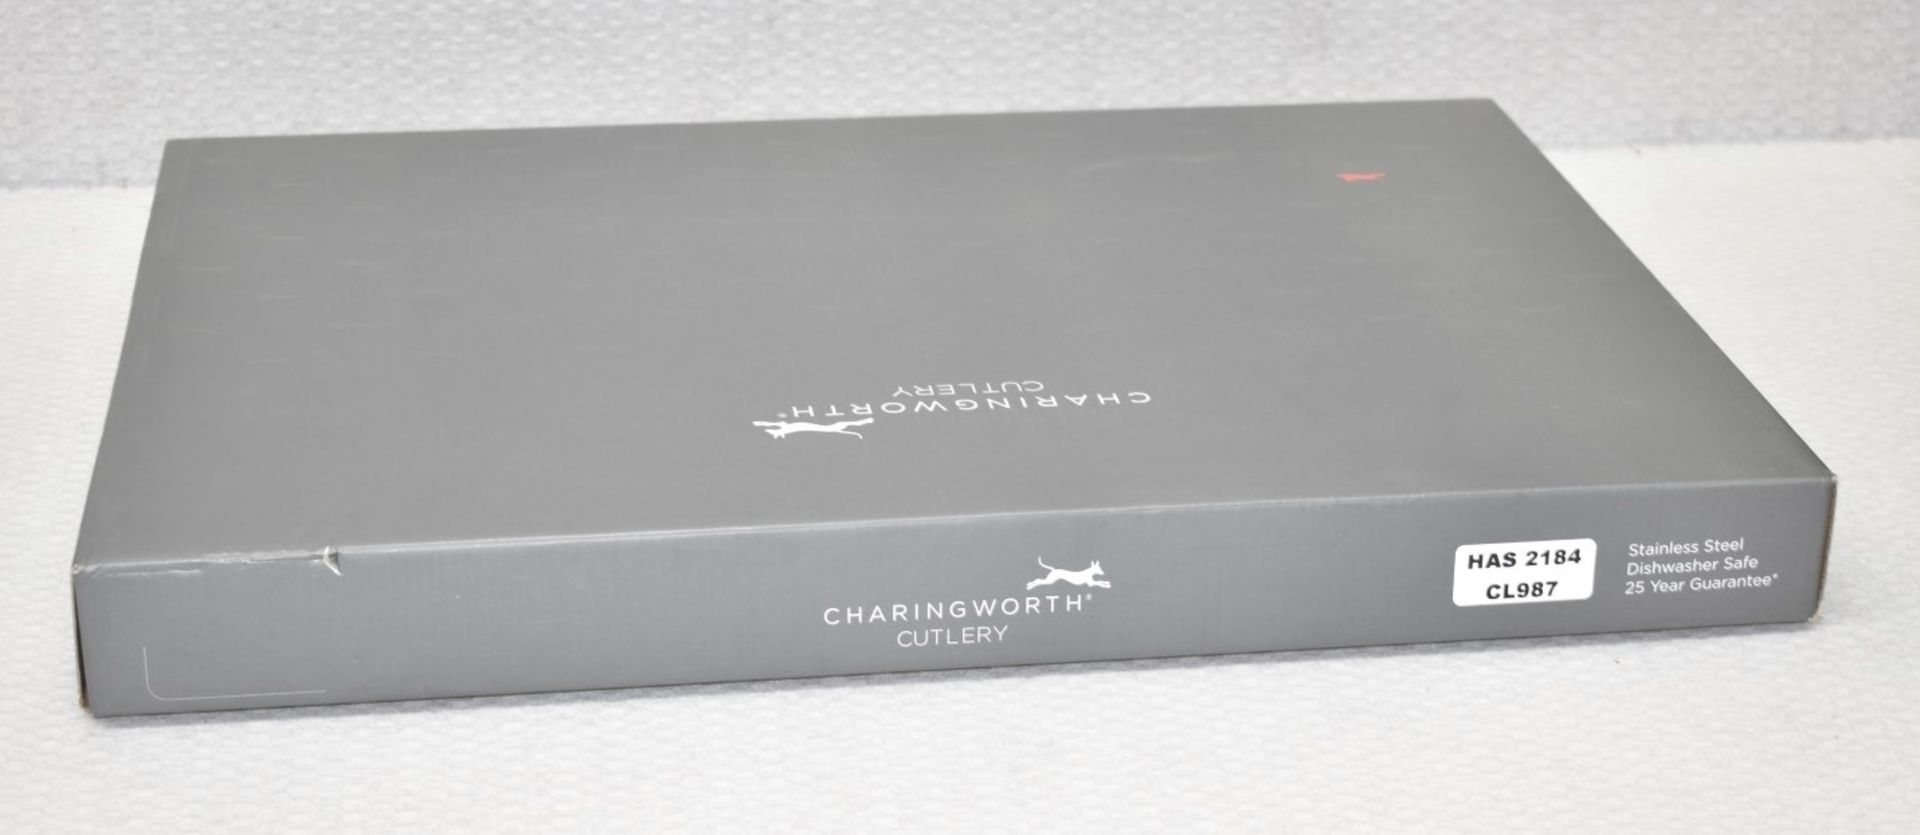 1 x CHARINGWORTH 'Fiddle' Luxury Vintage-style 42-Piece Cutlery Set - Original Price £370.00 - Boxed - Image 11 of 11